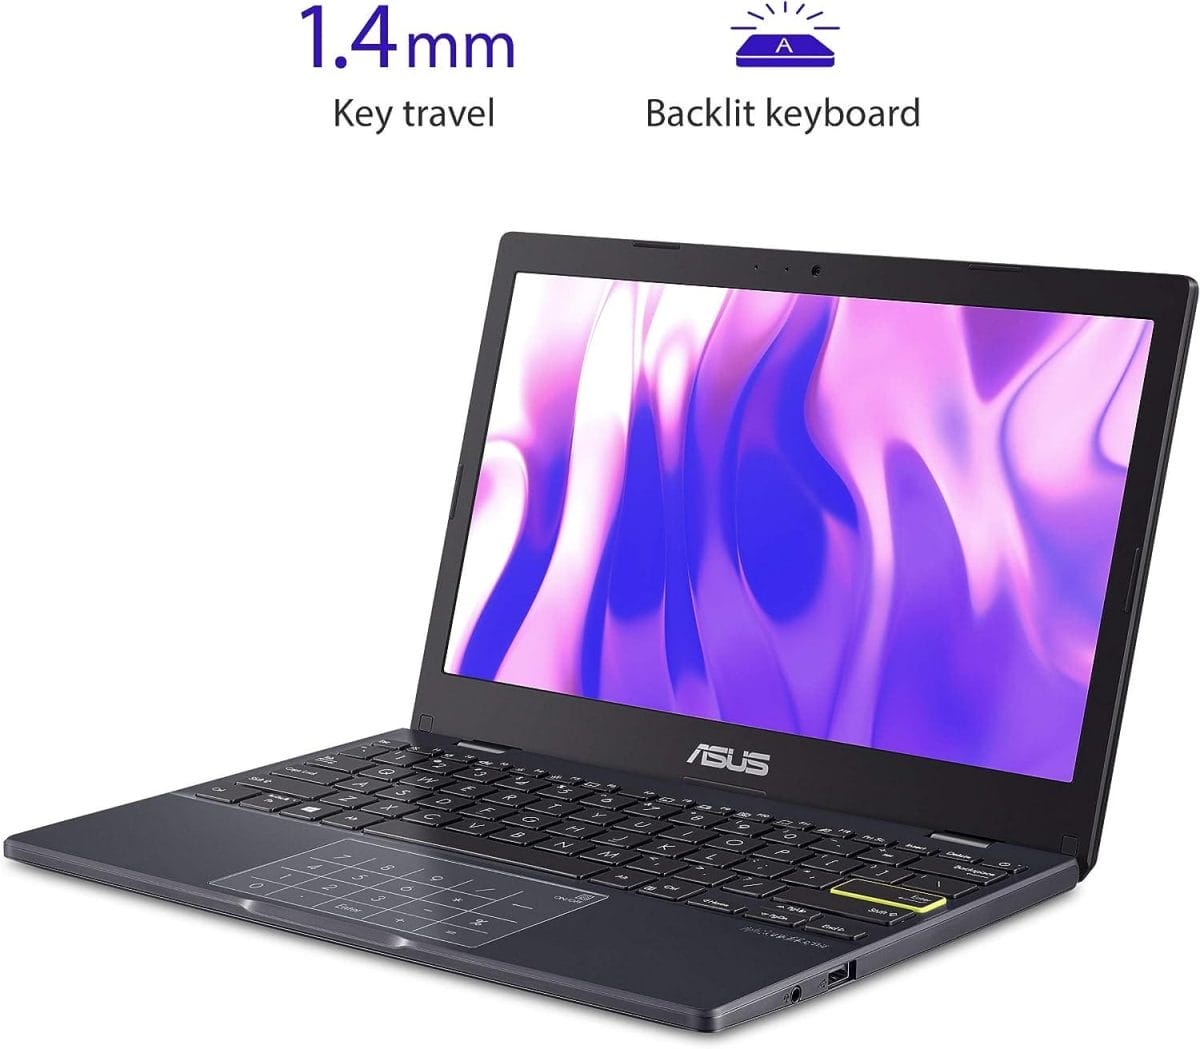 ASUS Vivobook Go 12 L210 11.6” Ultra-Thin Laptop, 2022 Version, Intel Celeron N4020, 4GB RAM, 64GB eMMC, Win 11 Home in S Mode with One Year of Office 365 Personal, L210MA-DS02